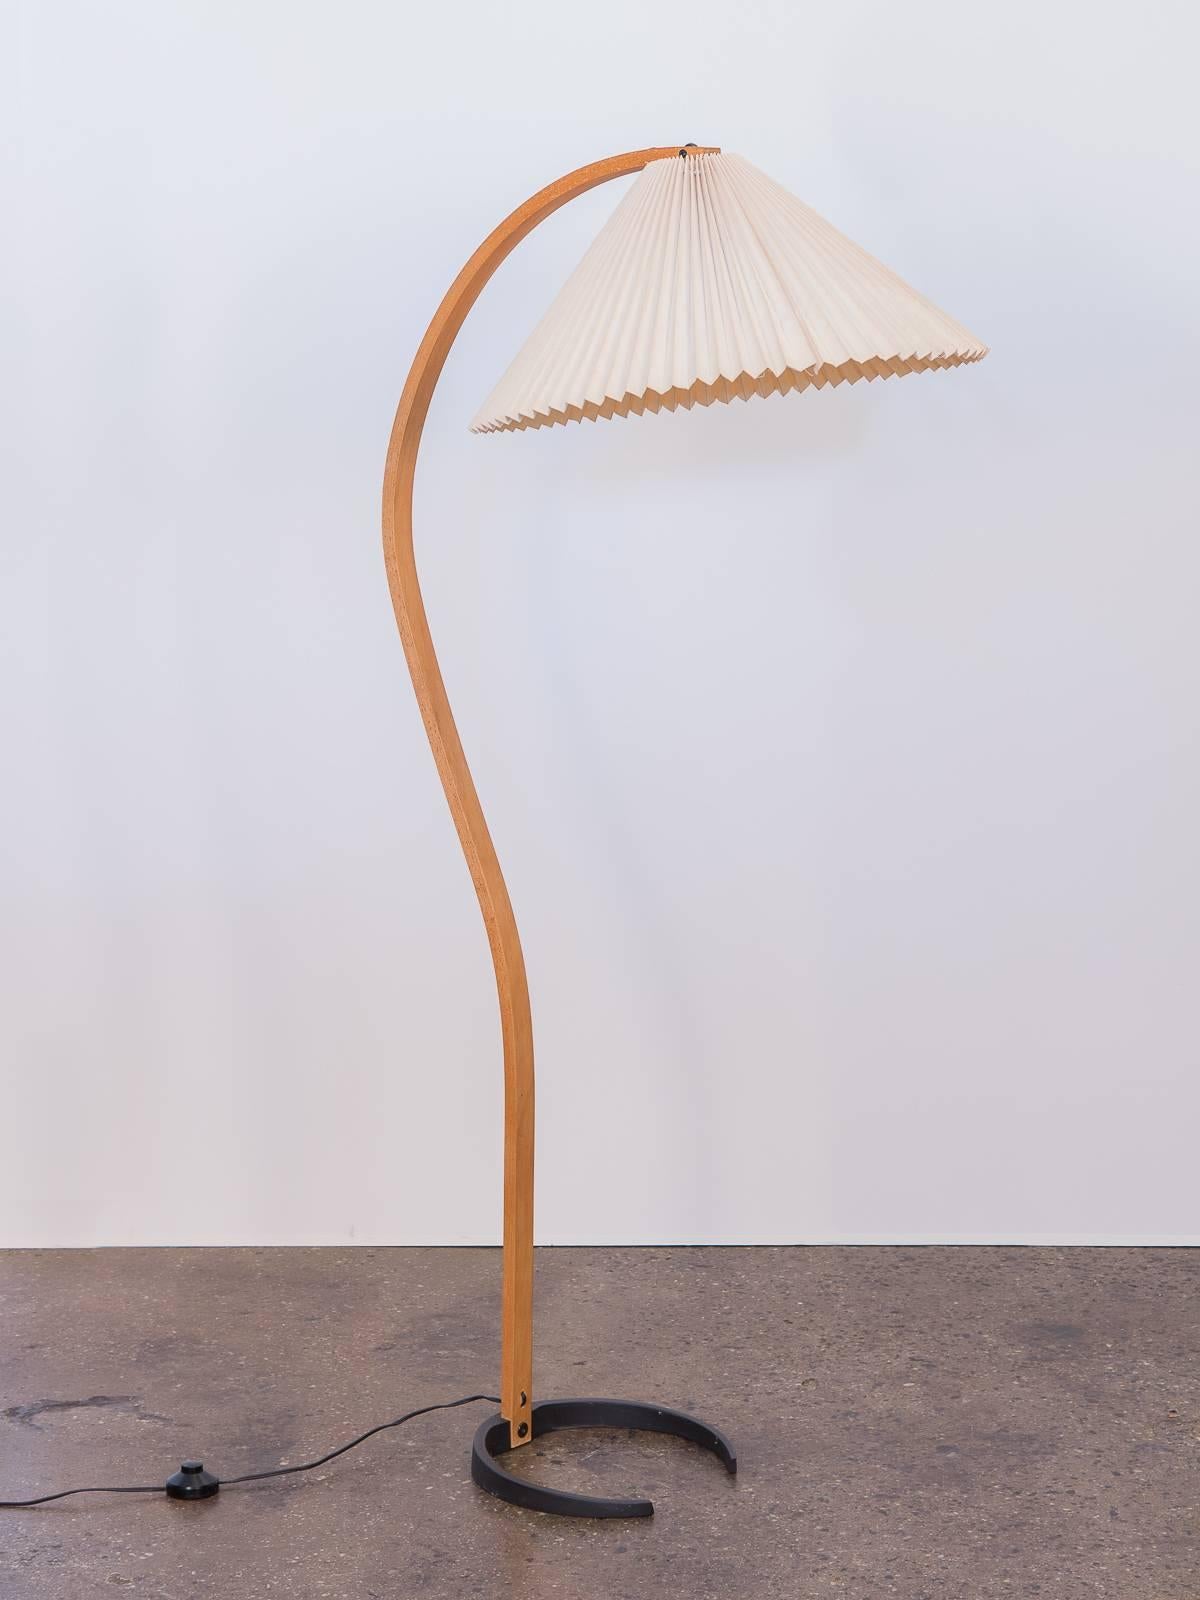 1970s bentwood floor lamp by Mads Caprani. Original linen pleated shade is in very good vintage condition, with no rips or tears. Works beautifully. Cast iron, crescent base is stamped with the Caprani name. A playfully sophisticated,